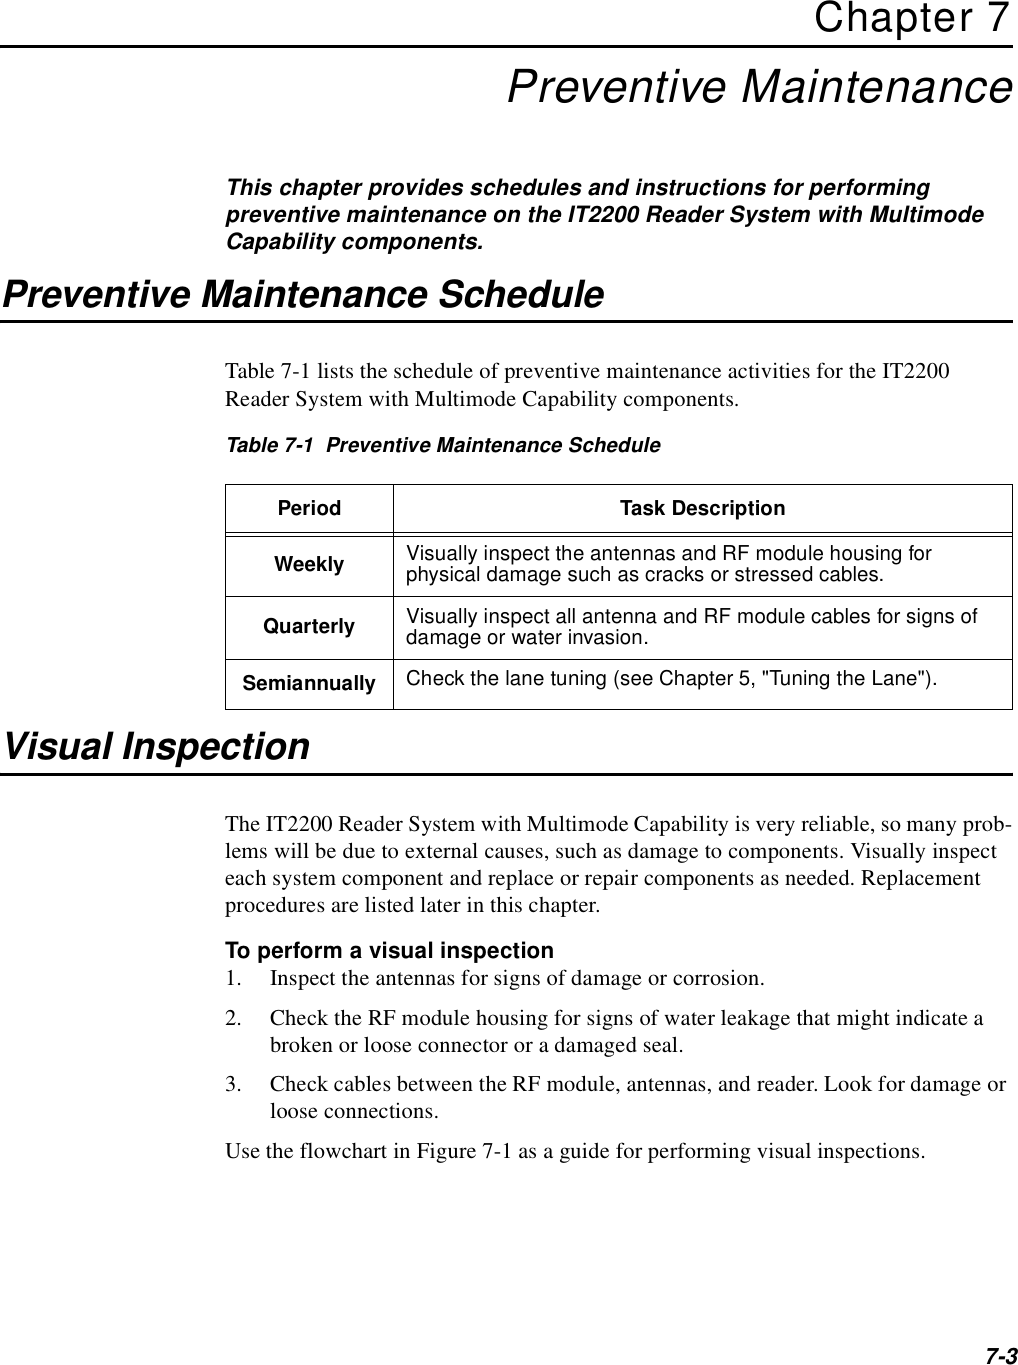 7-3Chapter 7Preventive MaintenanceThis chapter provides schedules and instructions for performing preventive maintenance on the IT2200 Reader System with Multimode Capability components.Preventive Maintenance ScheduleTable 7-1 lists the schedule of preventive maintenance activities for the IT2200 Reader System with Multimode Capability components.Table 7-1  Preventive Maintenance ScheduleVisual InspectionThe IT2200 Reader System with Multimode Capability is very reliable, so many prob-lems will be due to external causes, such as damage to components. Visually inspect each system component and replace or repair components as needed. Replacement procedures are listed later in this chapter.To perform a visual inspection1. Inspect the antennas for signs of damage or corrosion.2. Check the RF module housing for signs of water leakage that might indicate a broken or loose connector or a damaged seal.3. Check cables between the RF module, antennas, and reader. Look for damage or loose connections.Use the flowchart in Figure 7-1 as a guide for performing visual inspections.Period Task DescriptionWeekly Visually inspect the antennas and RF module housing for physical damage such as cracks or stressed cables.Quarterly Visually inspect all antenna and RF module cables for signs of damage or water invasion.Semiannually Check the lane tuning (see Chapter 5, &quot;Tuning the Lane&quot;).